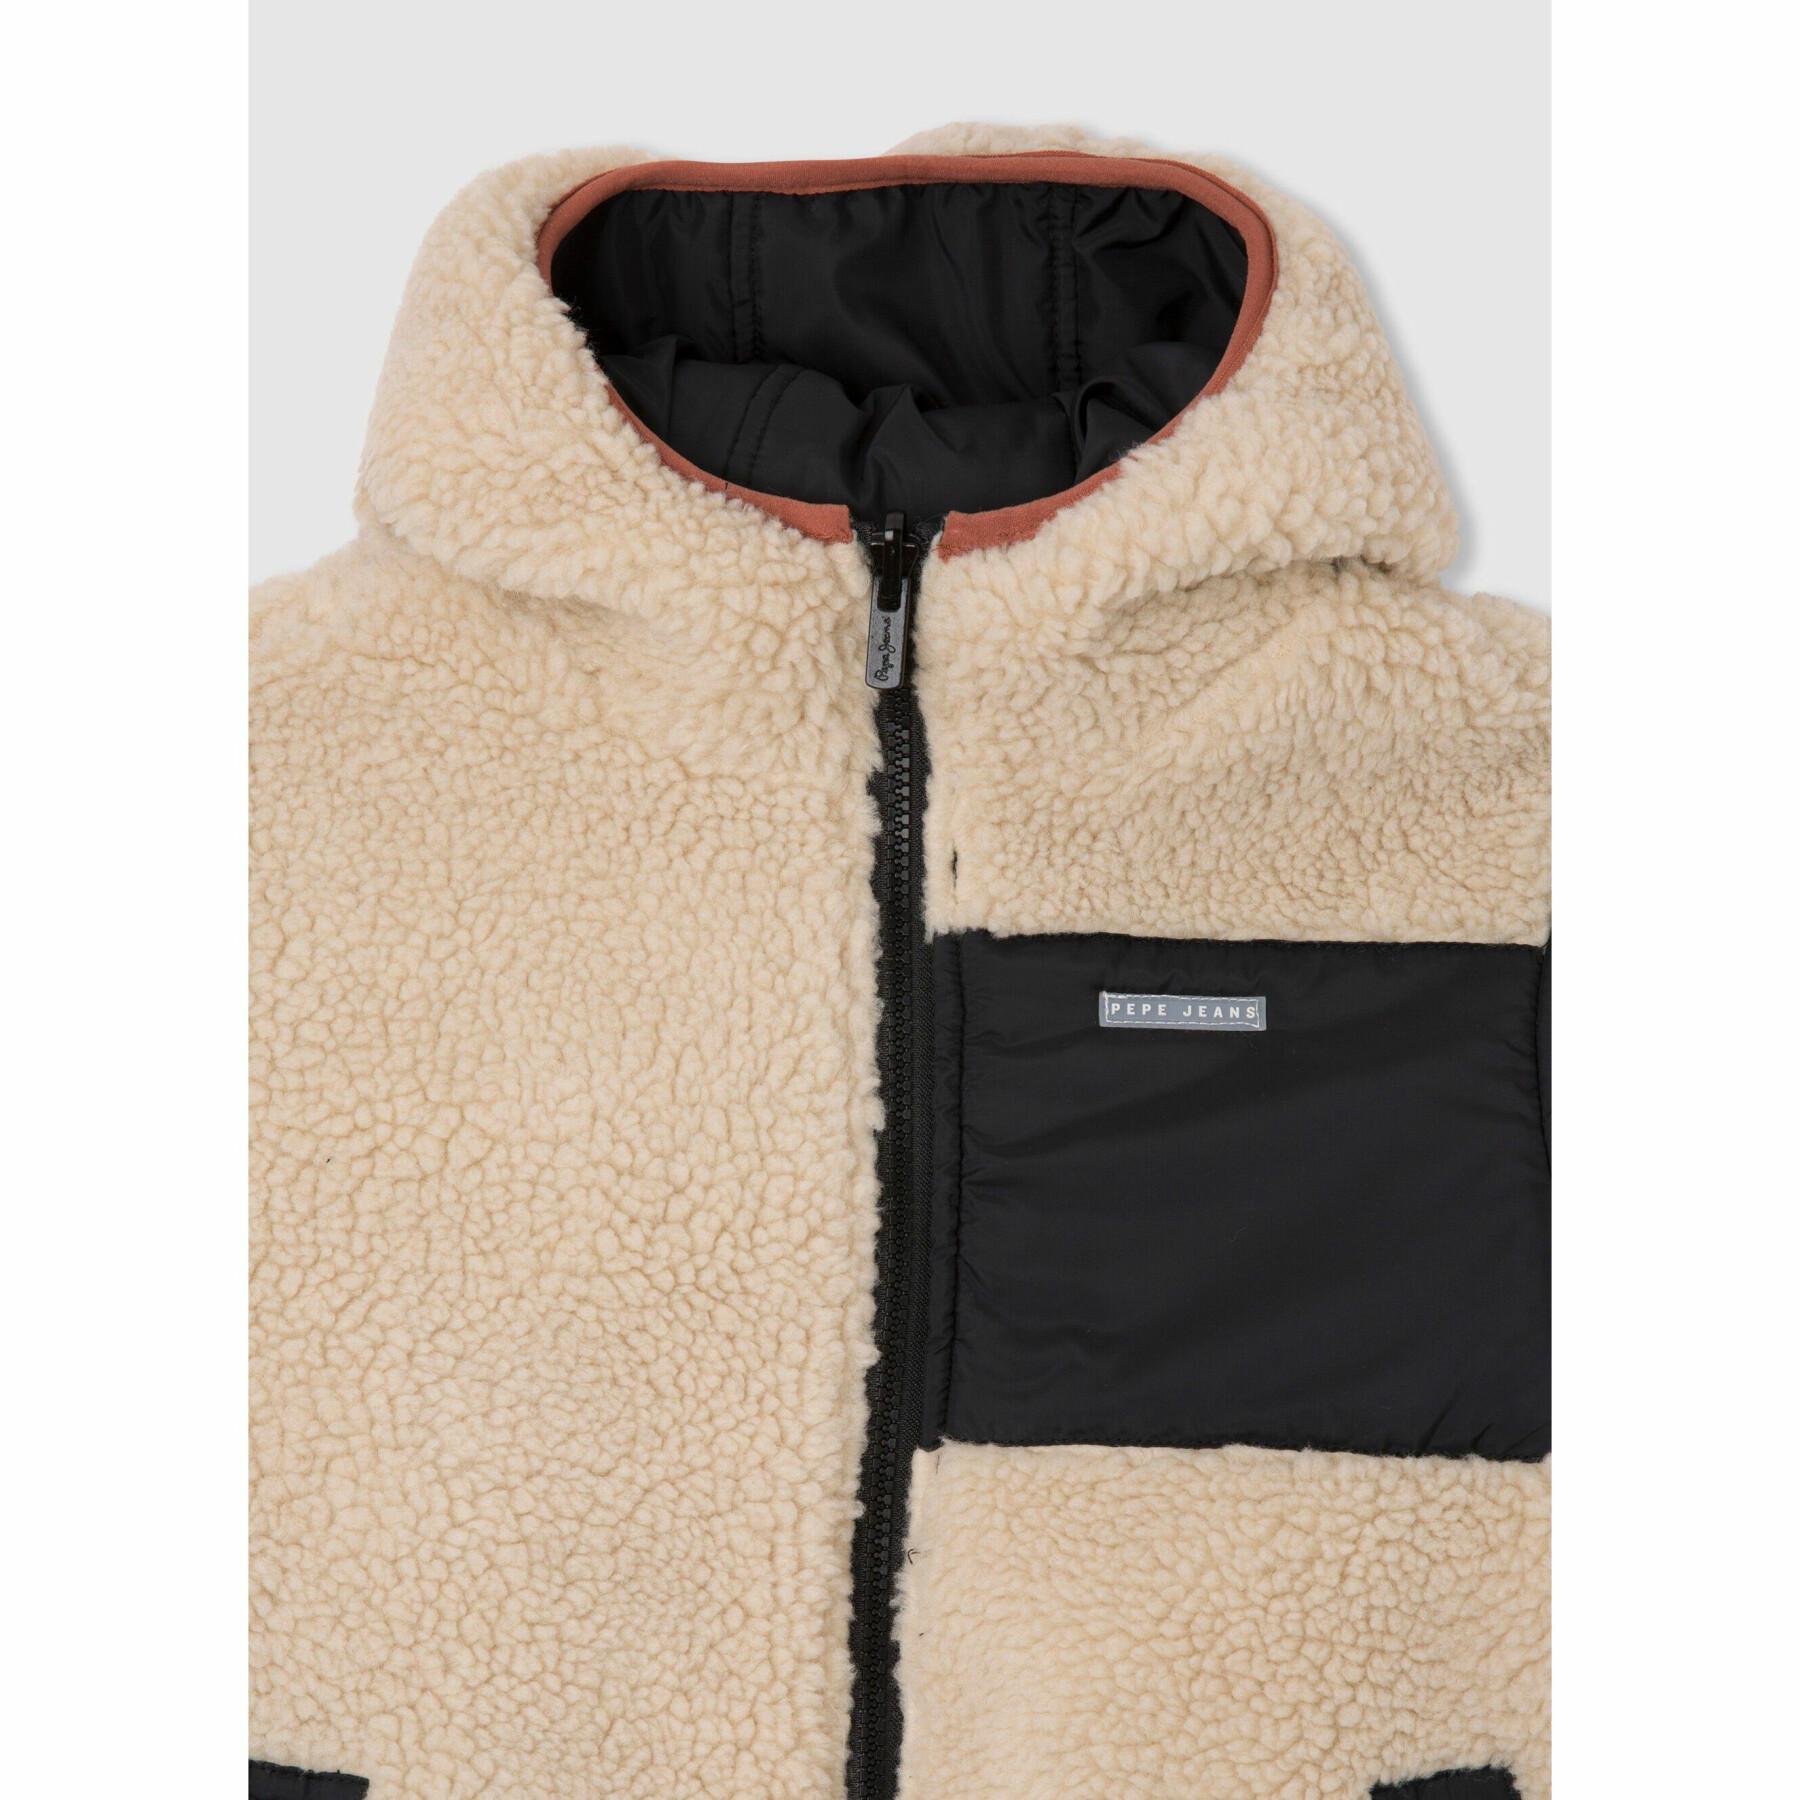 Children's parka Pepe Jeans Gilford